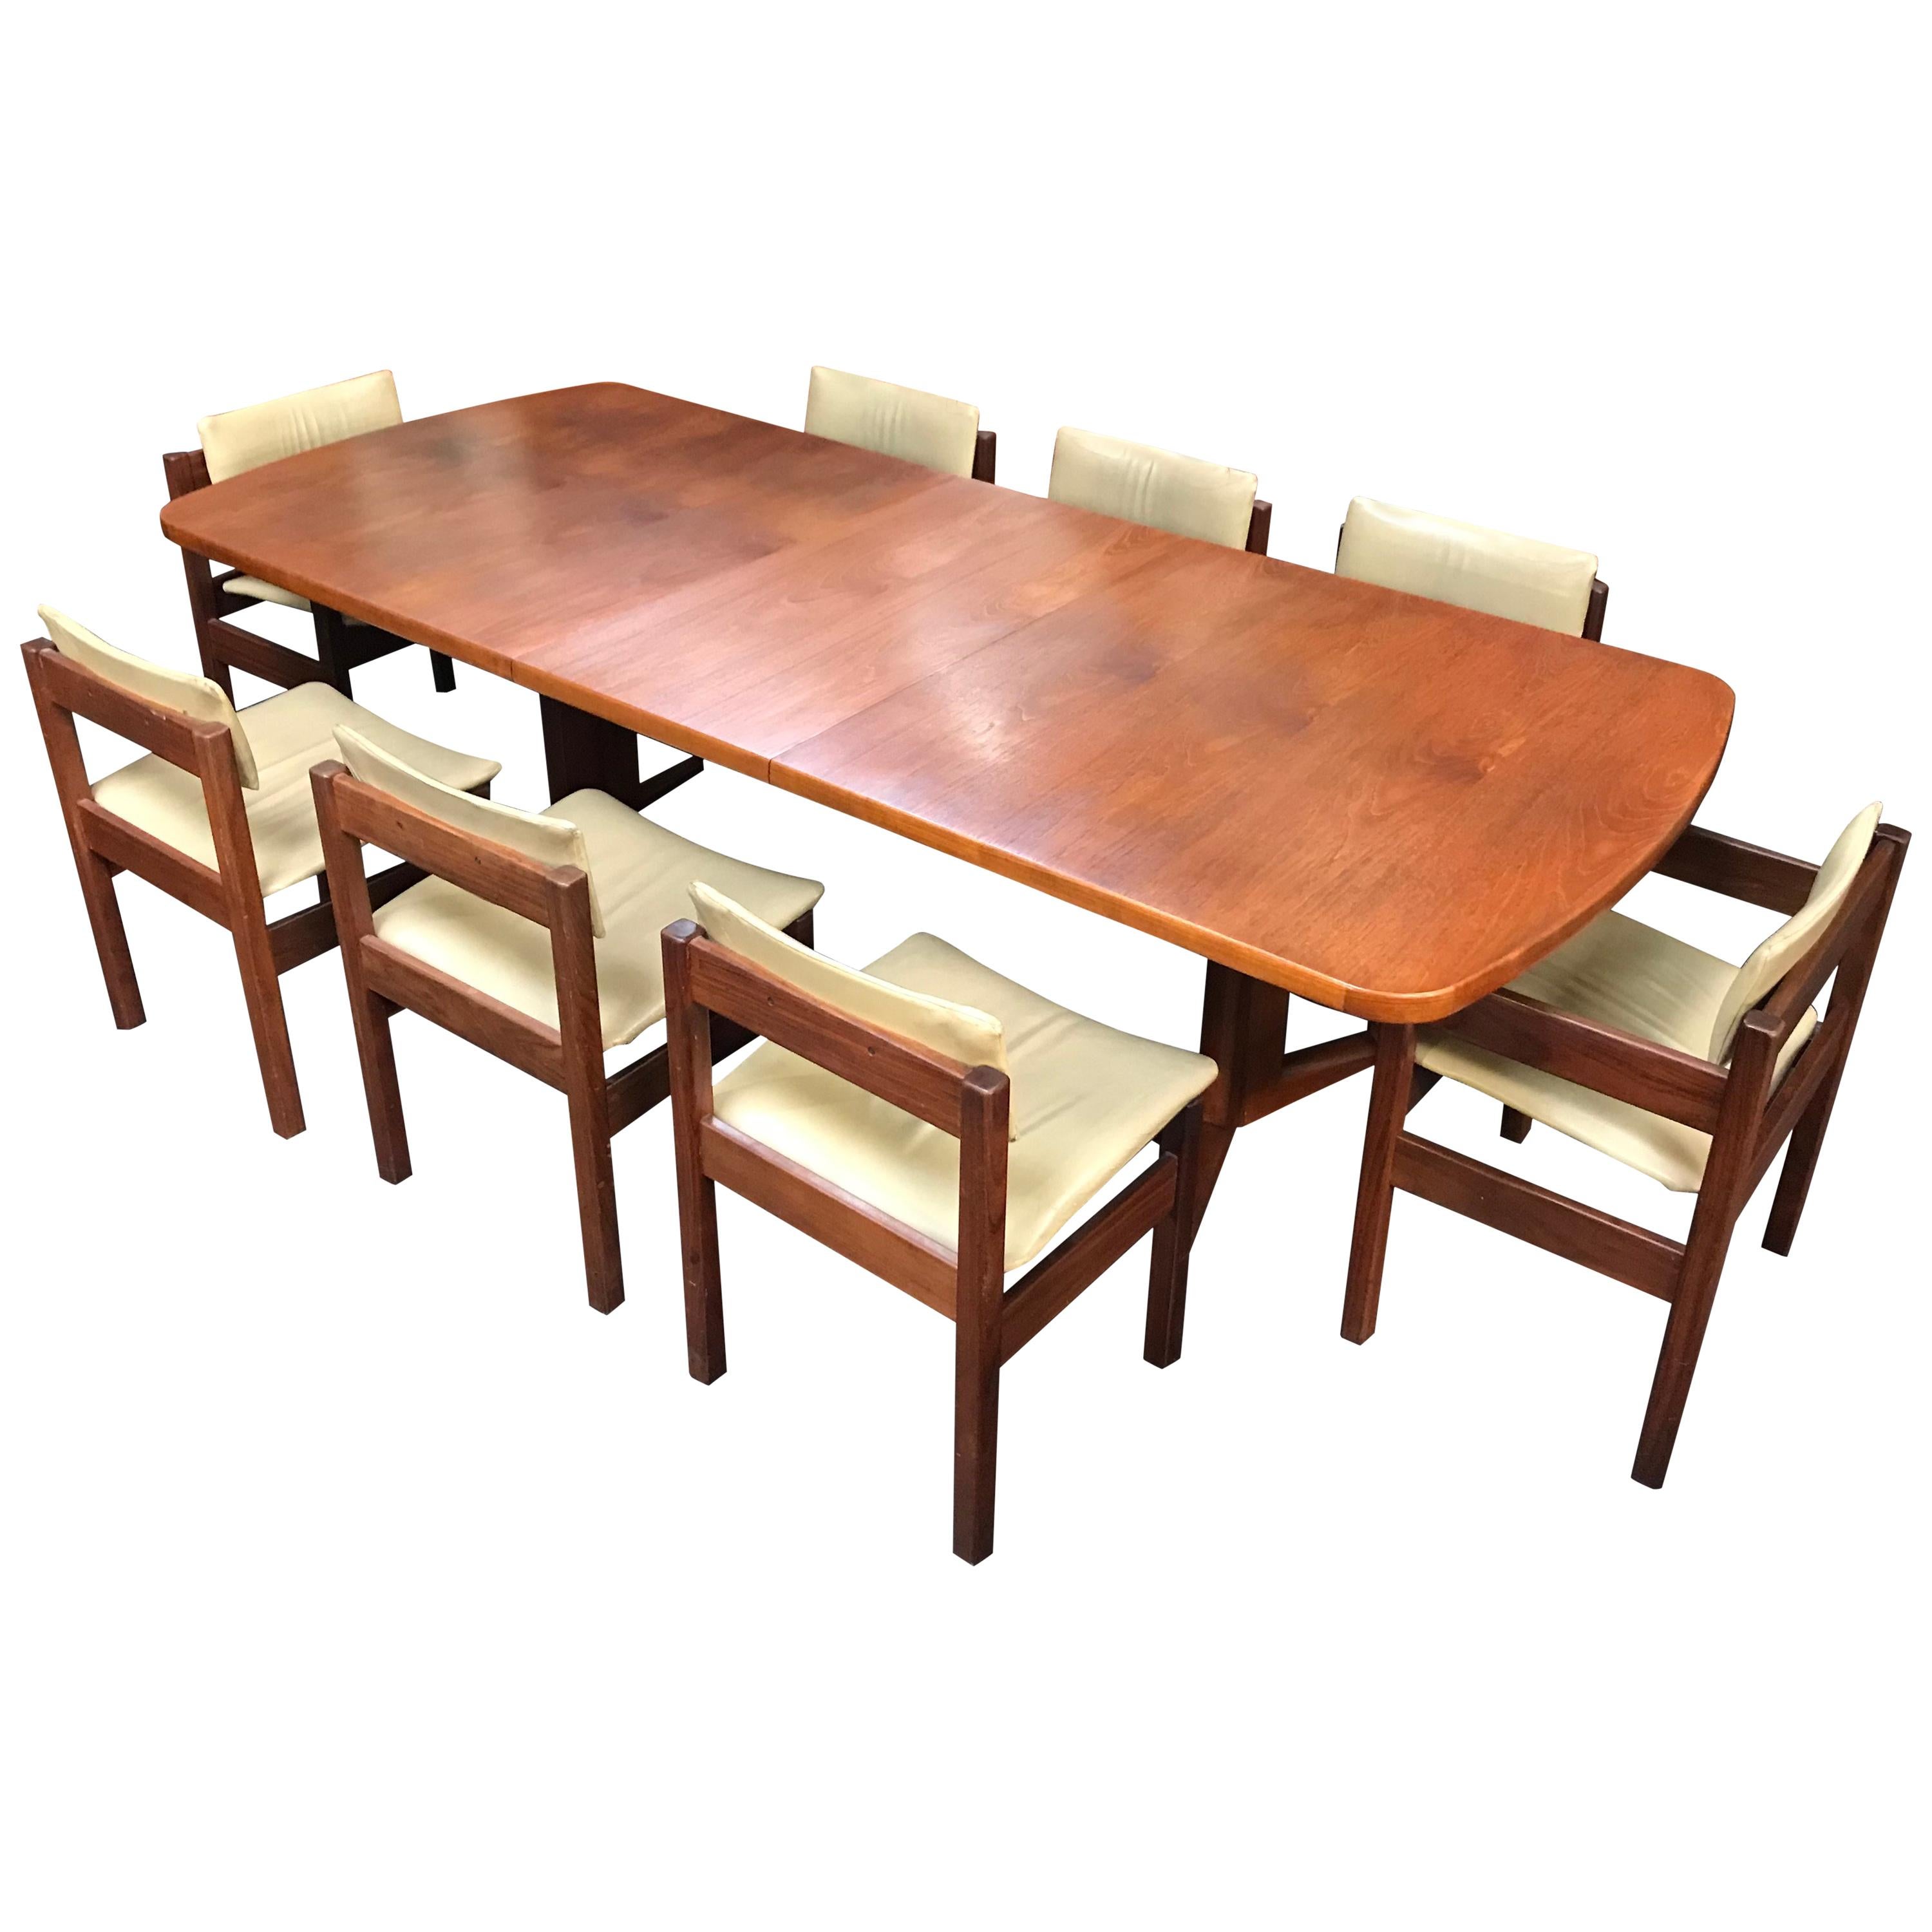 British Midcentury Teak Dining Table and 8-Leather Chairs by Gordon Russell